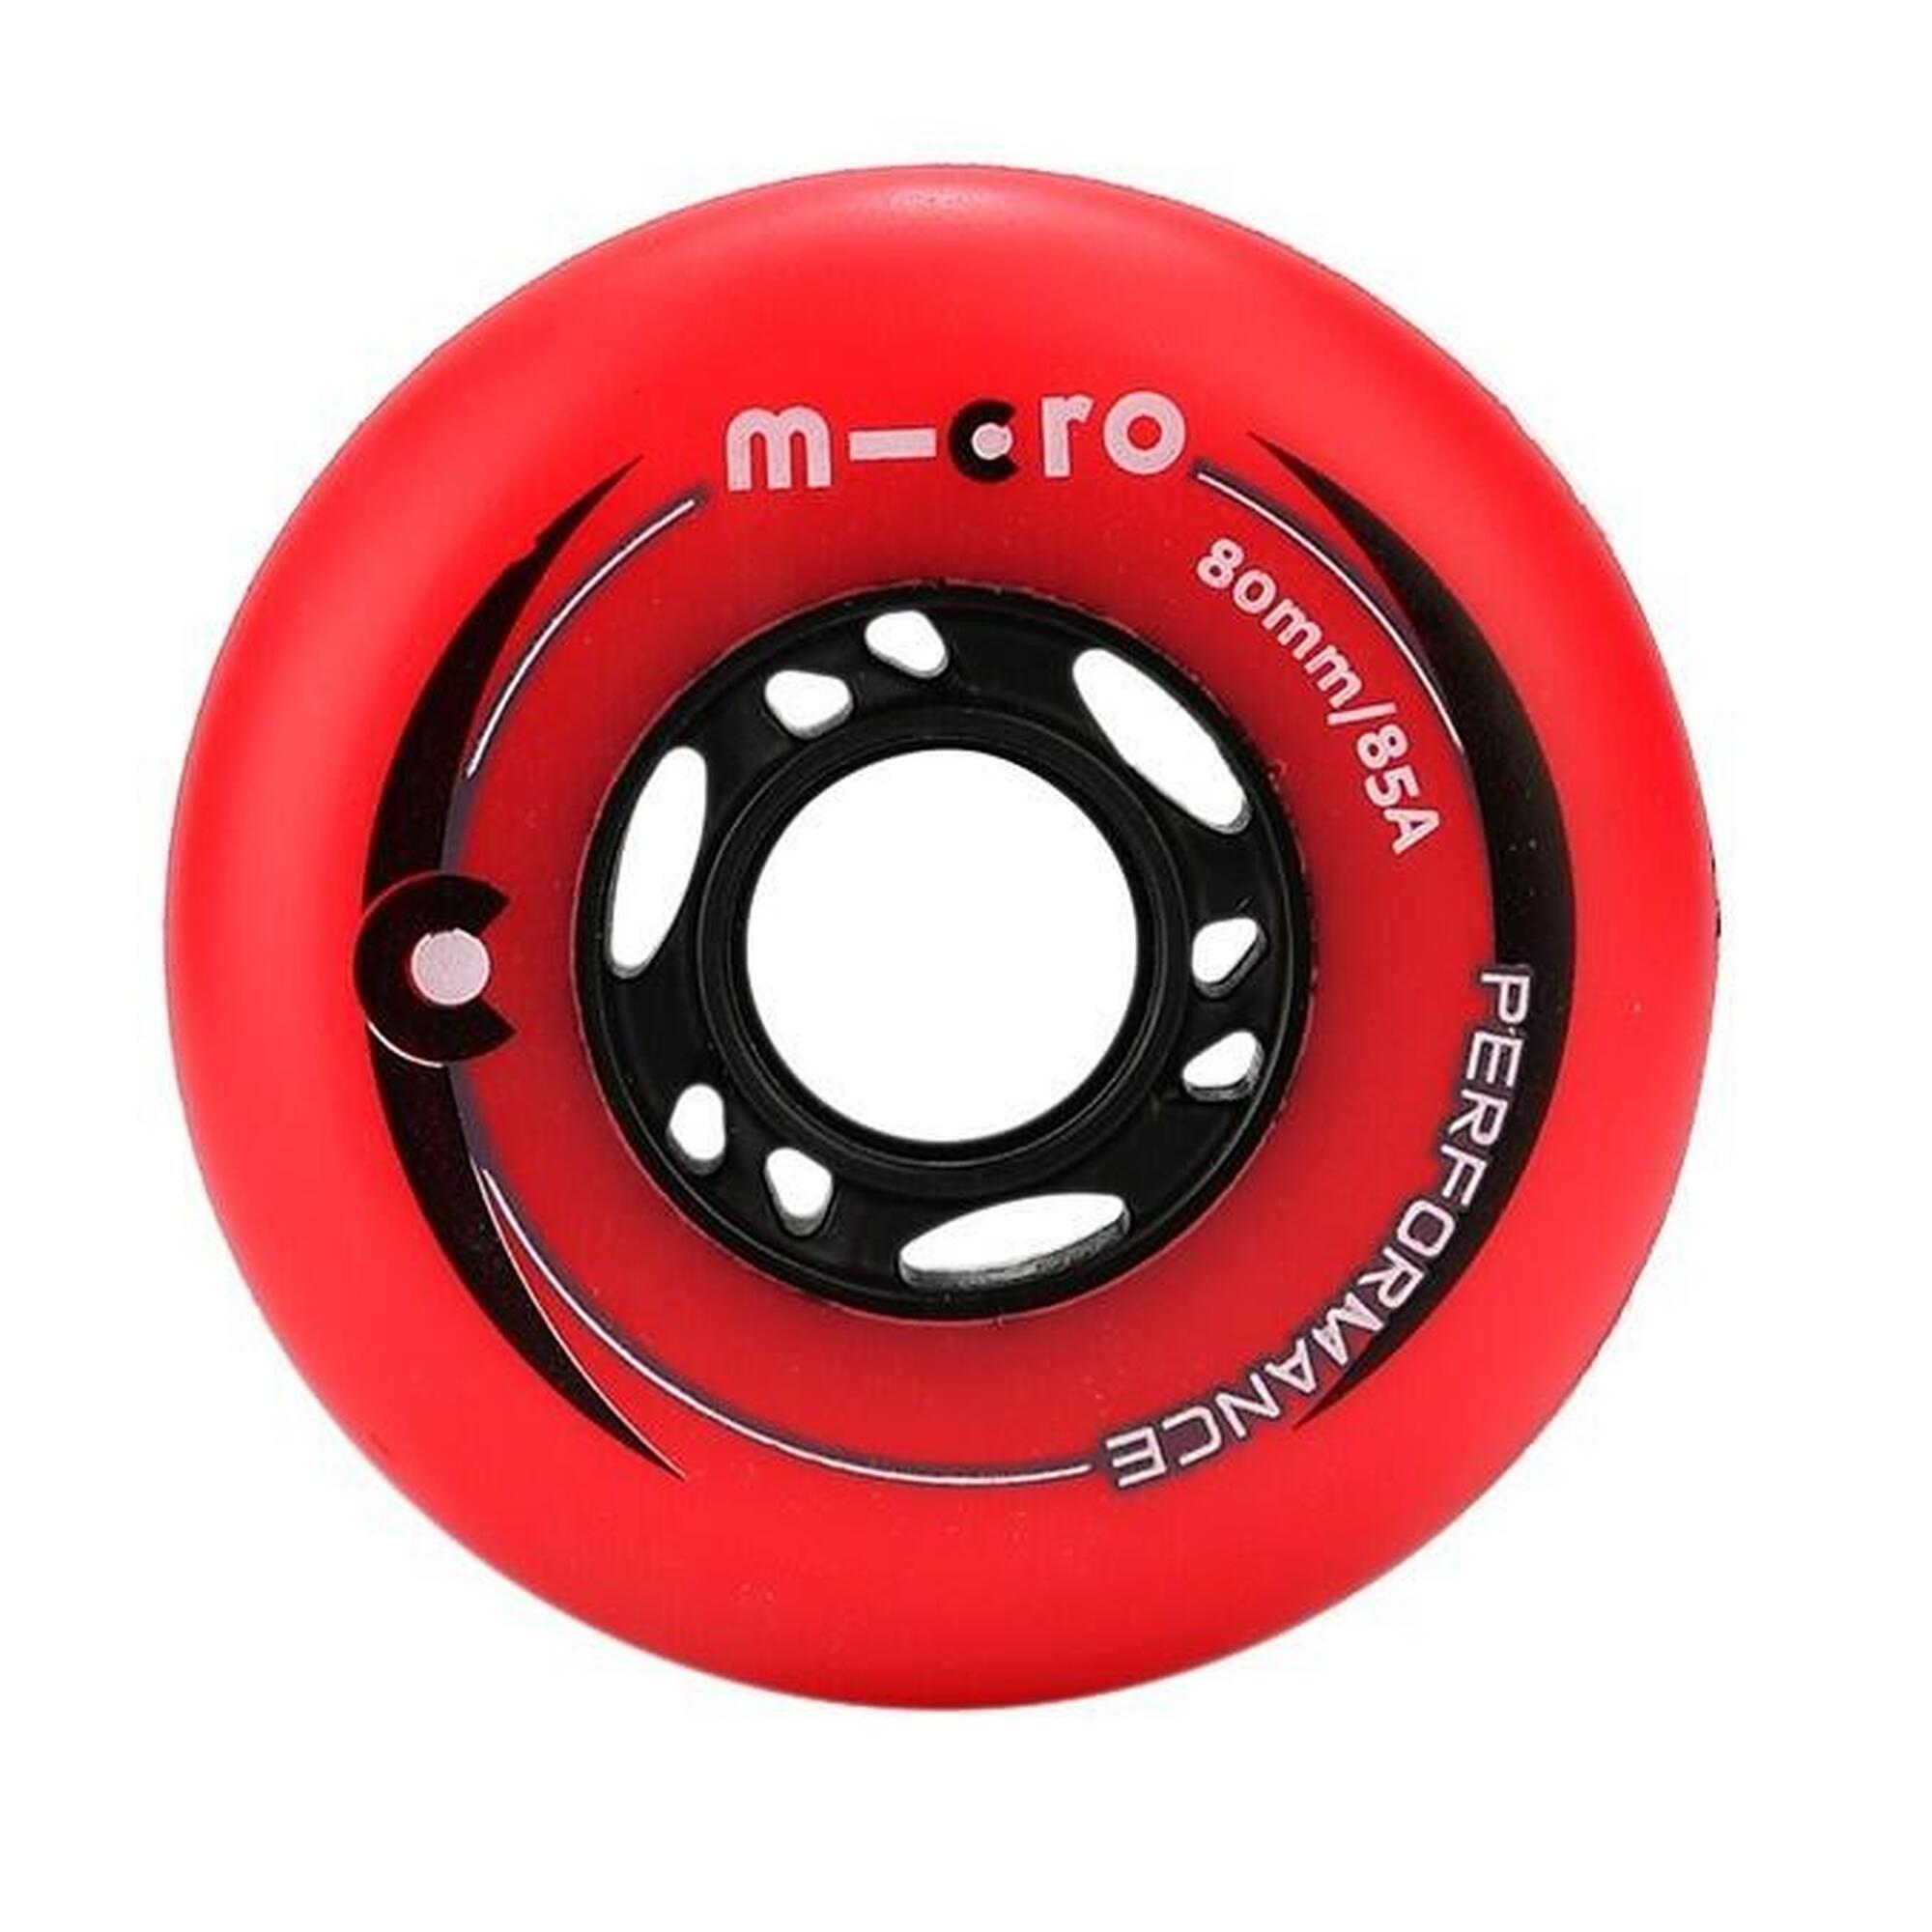 MICRO SKATE PERFORMANCE WHEELS - 76MM/85A RED 4 PACK 76 MM